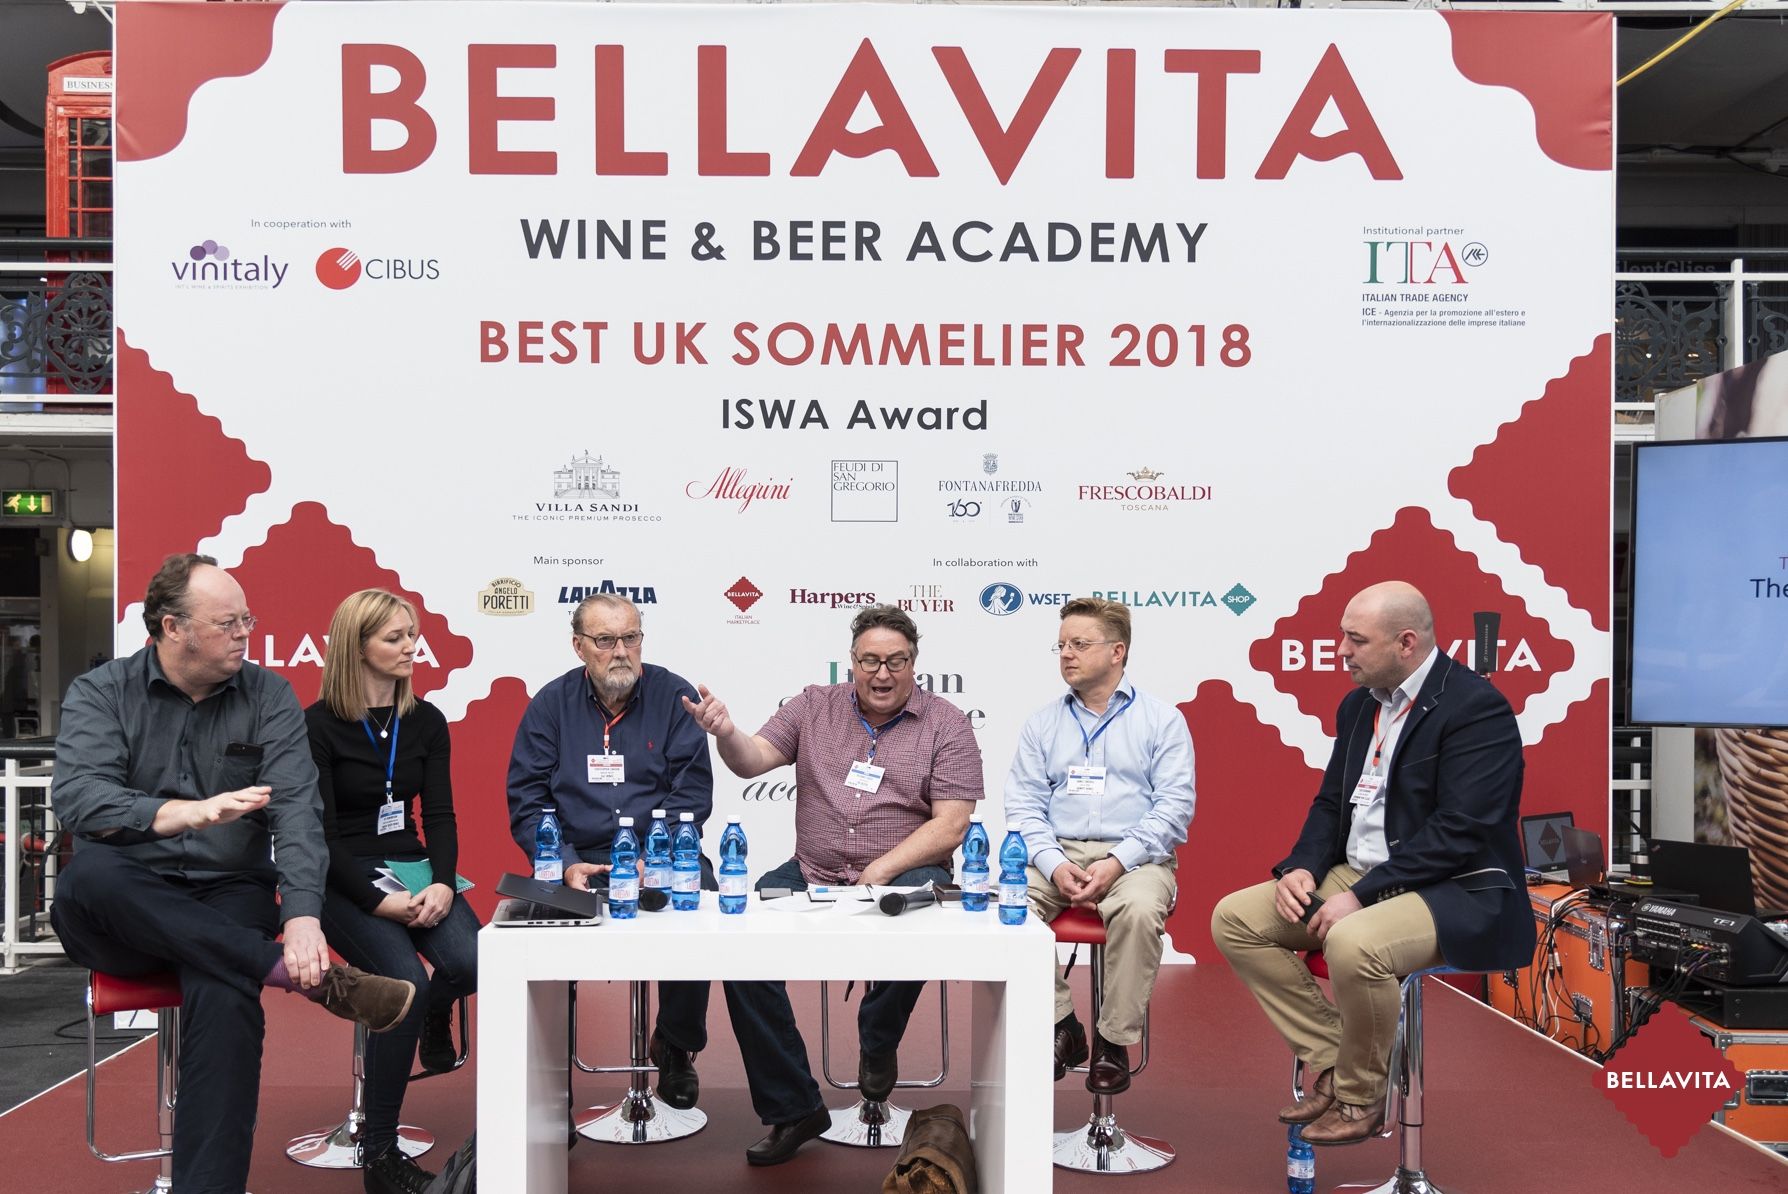 Bellavita Expo: doing what it can for Italian & Mediterranean wines